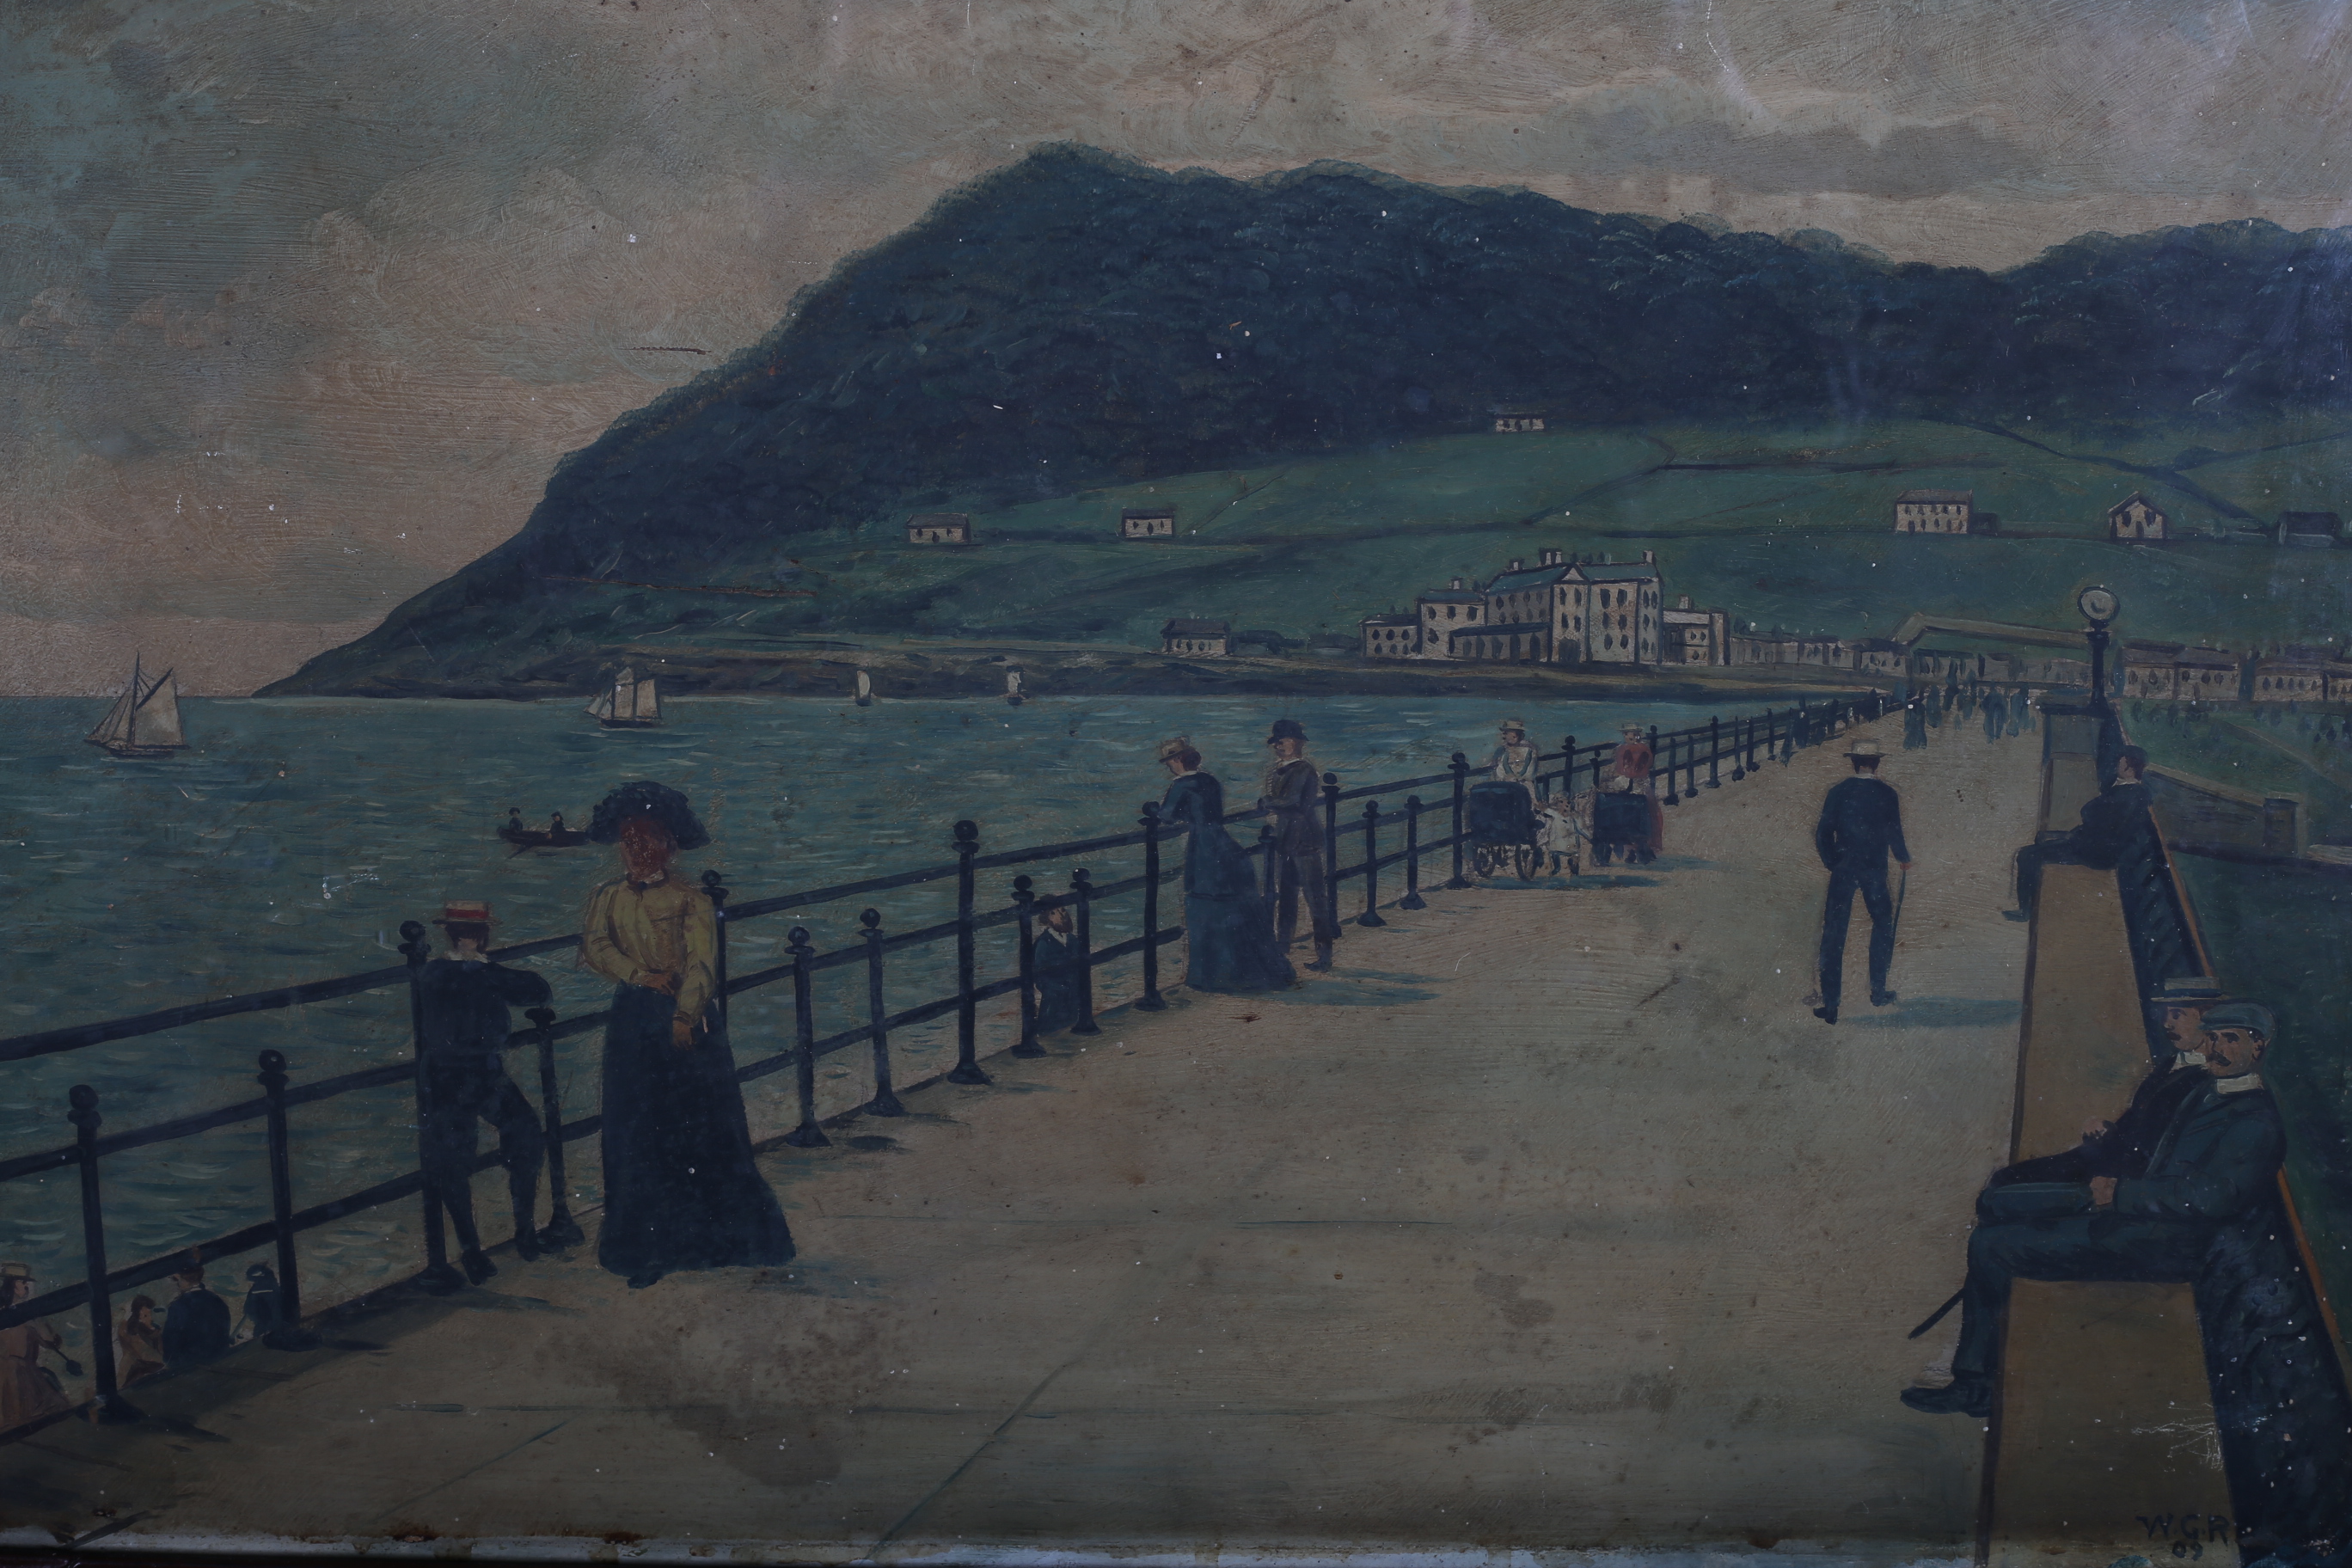 W G R (POSSIBLY WILLIAM GEORGE ROBB) BRITISH 1872 - 1940 PROMENADE WITH FIGURES Oil on